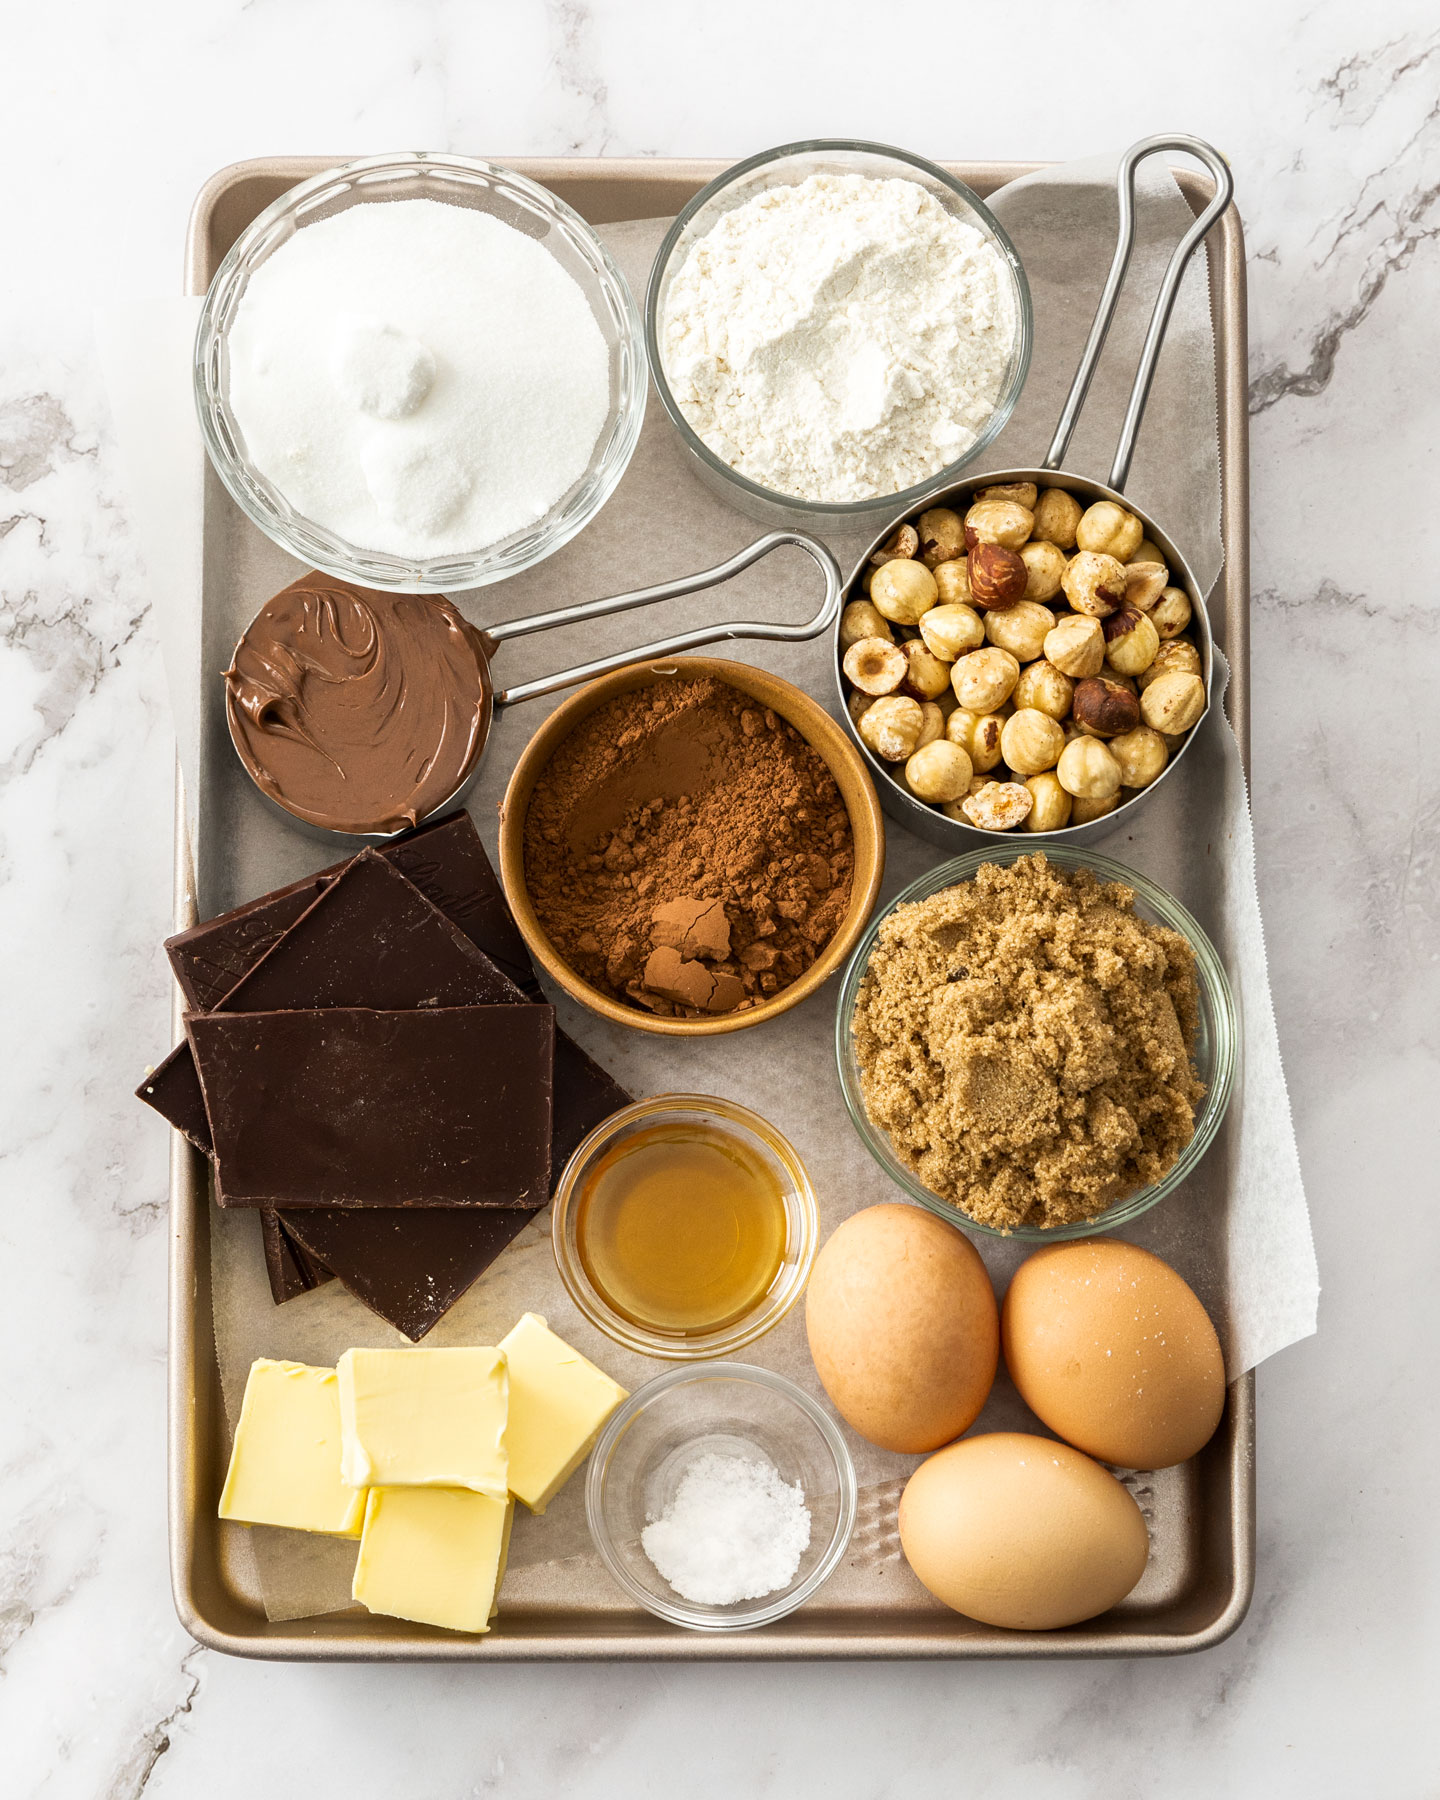 Ingredients for hazelnut brownies on a baking tray.